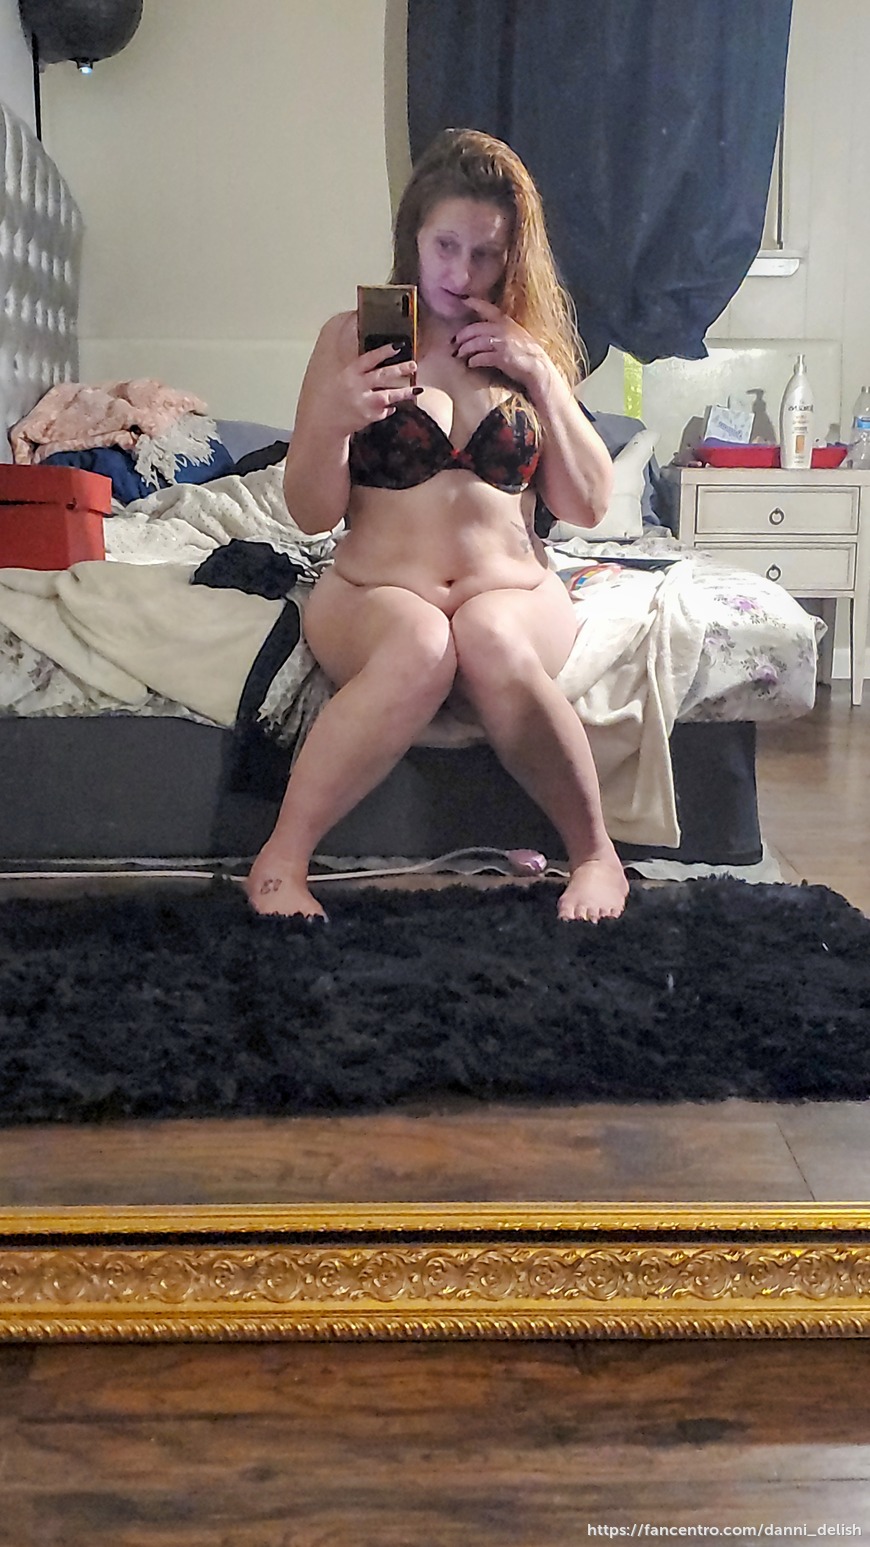 So I was taking a few pics of myself in the mirror and ended up feelin' myself so much I shot a clip to show you just how much! - post image 2